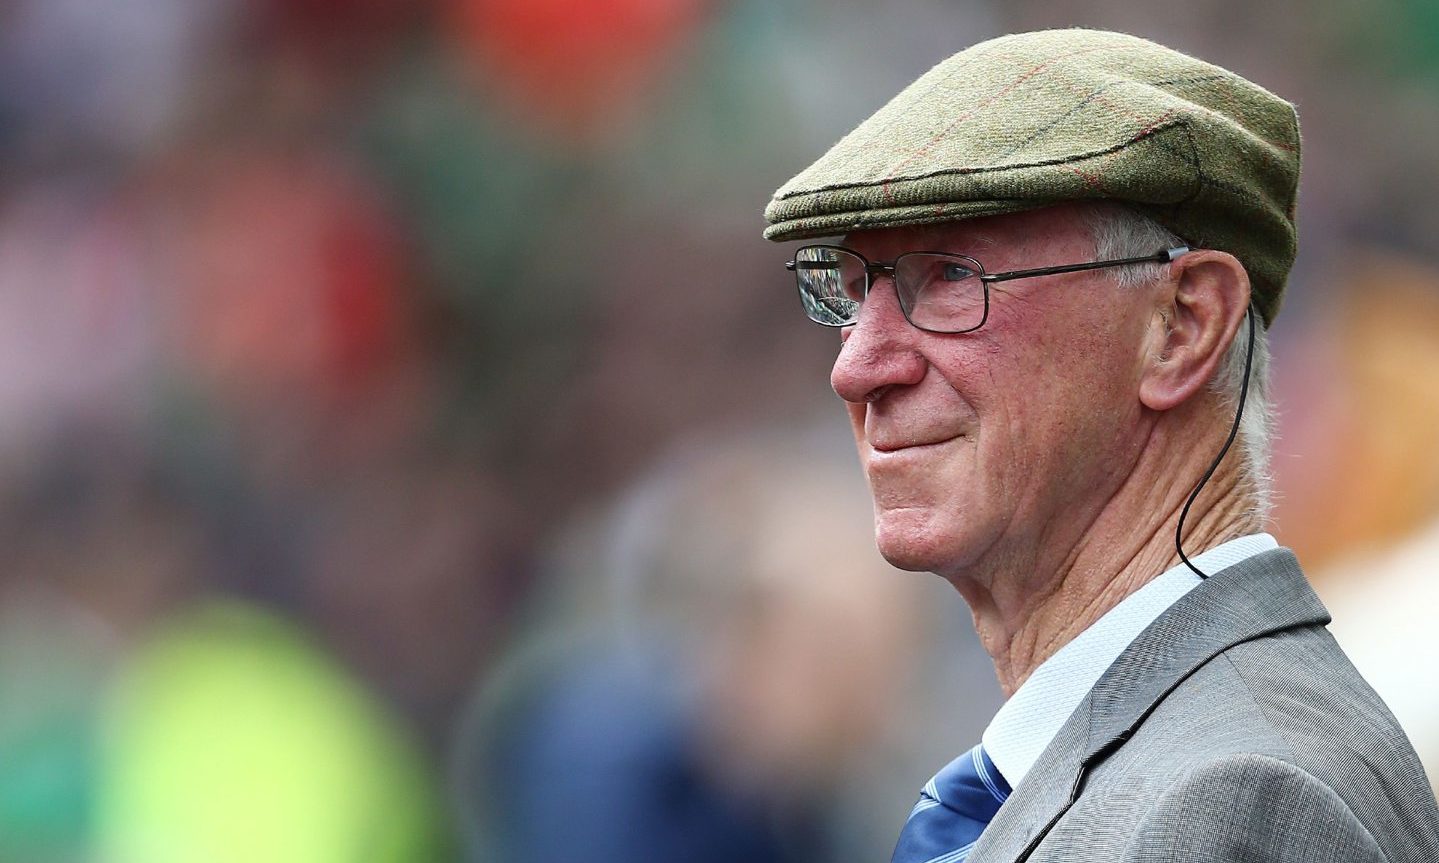 The train journey summed up the magic of the late Jack Charlton.